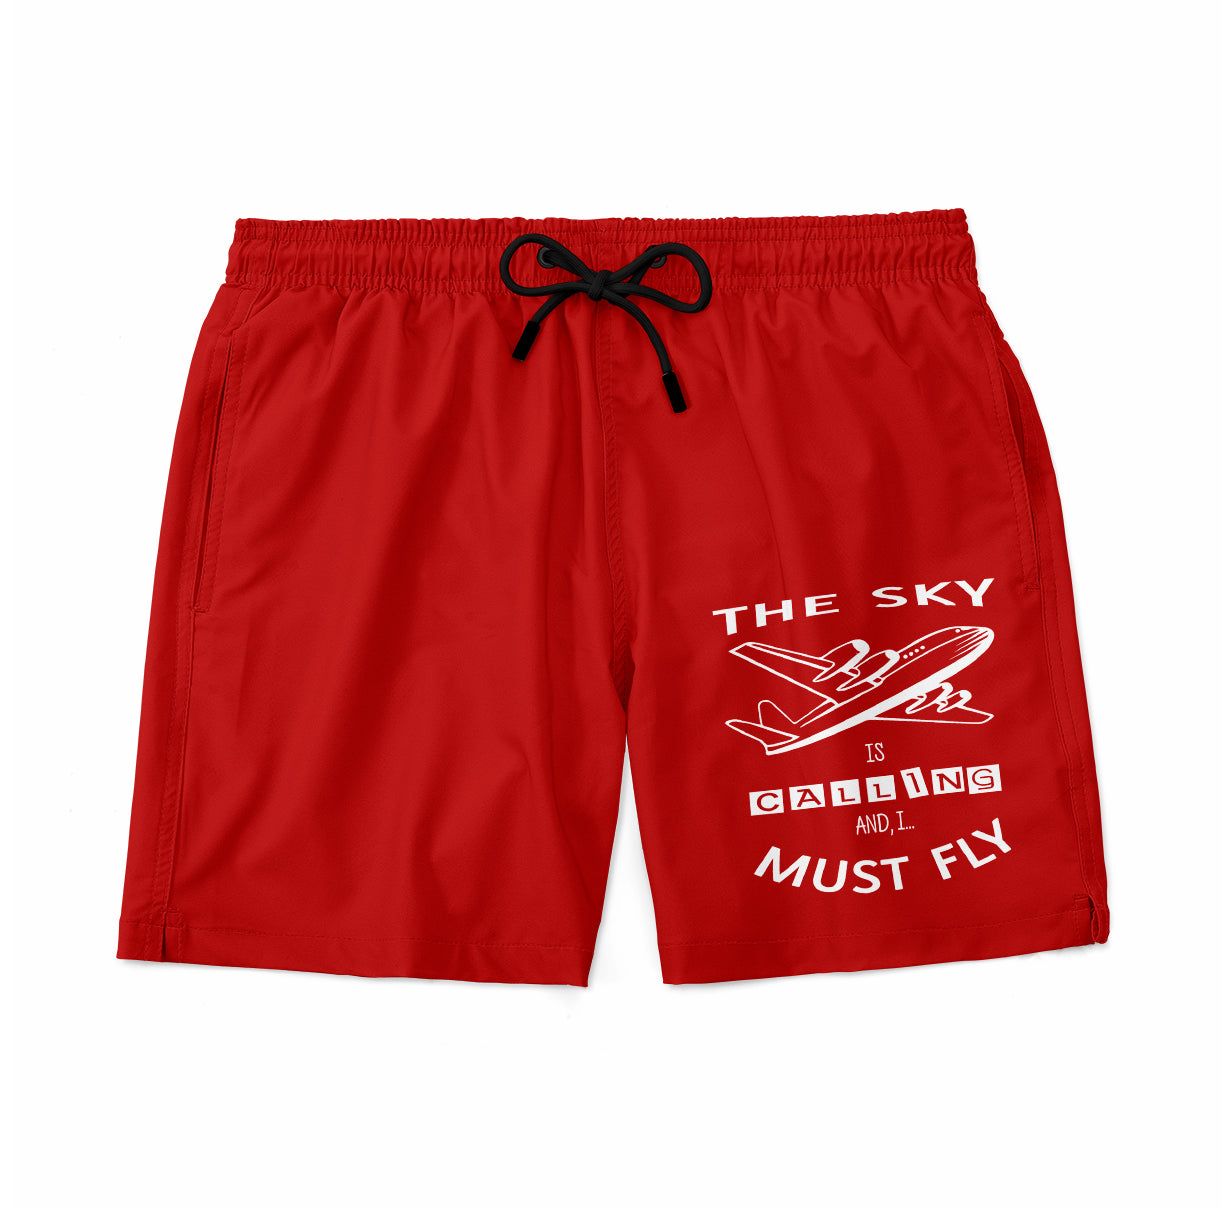 The Sky is Calling and I Must Fly Designed Swim Trunks & Shorts